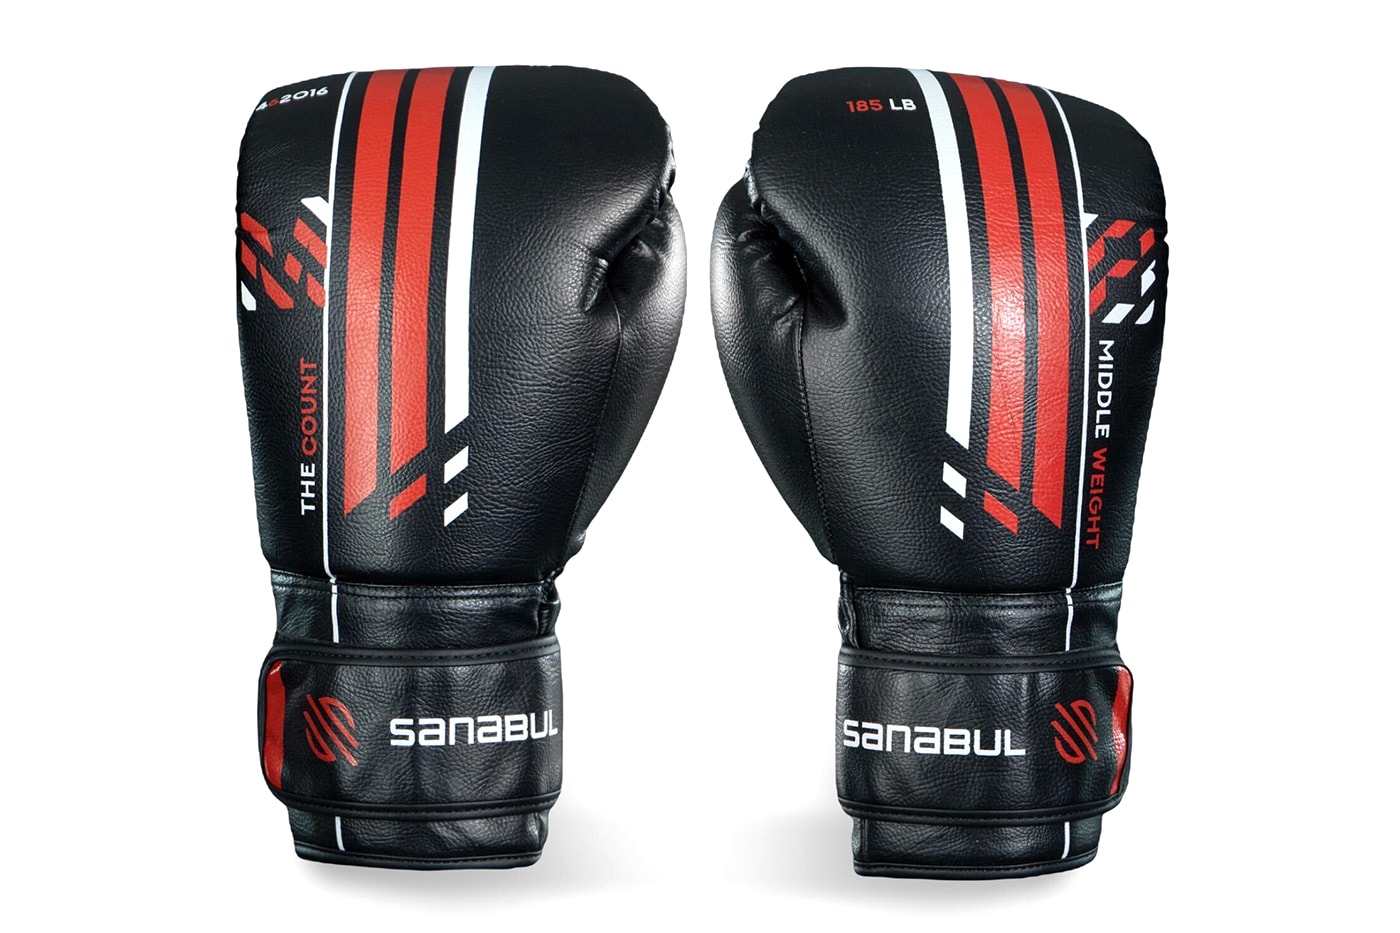 Michael Bisping Sanabul LegacyBoxing Gloves the count ufc fighting mma UK Manchester boxing gloves 